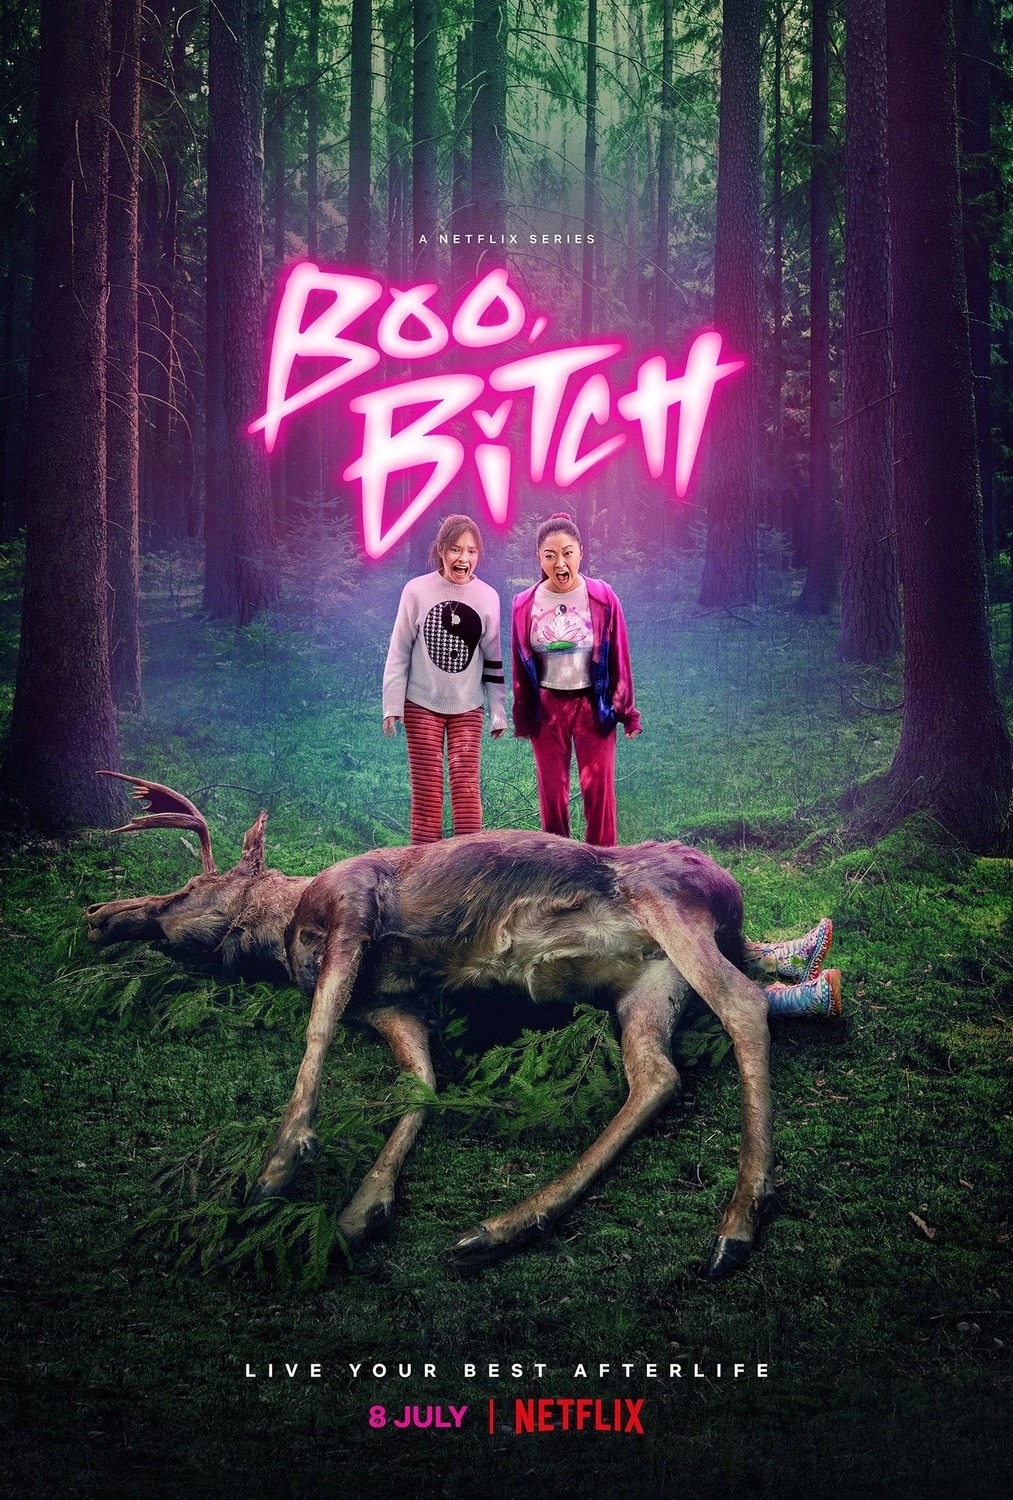 Extra Large TV Poster Image for Boo, Bitch 